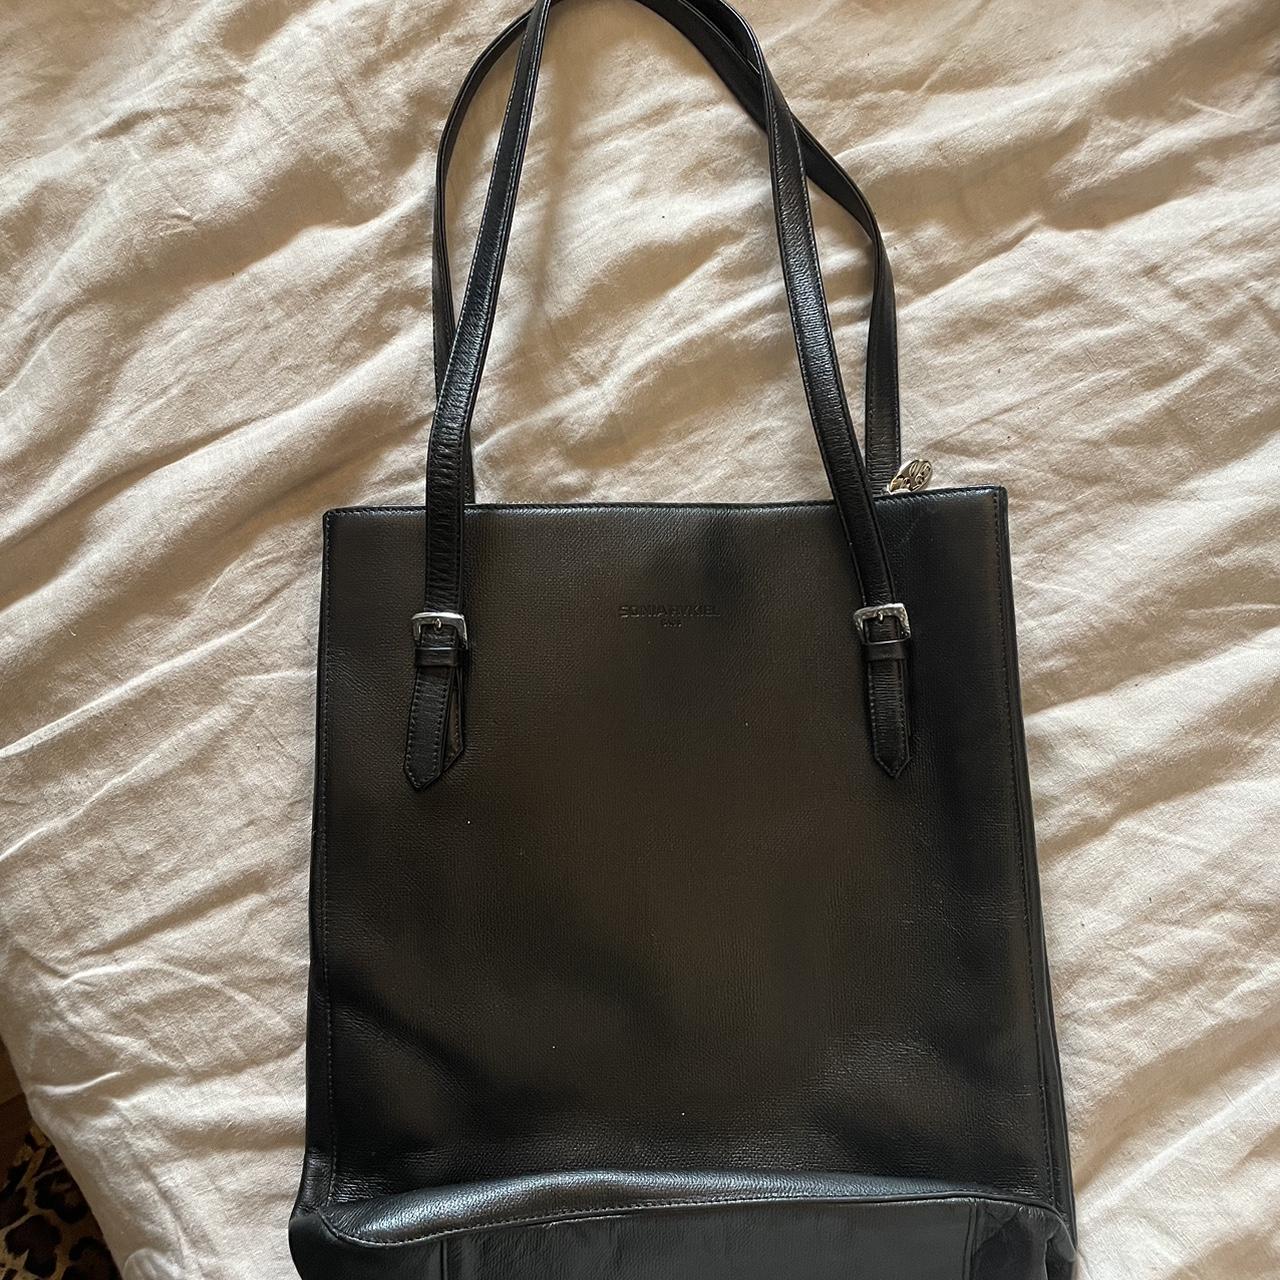 Lovely perfect everyday bag in great condition.... - Depop